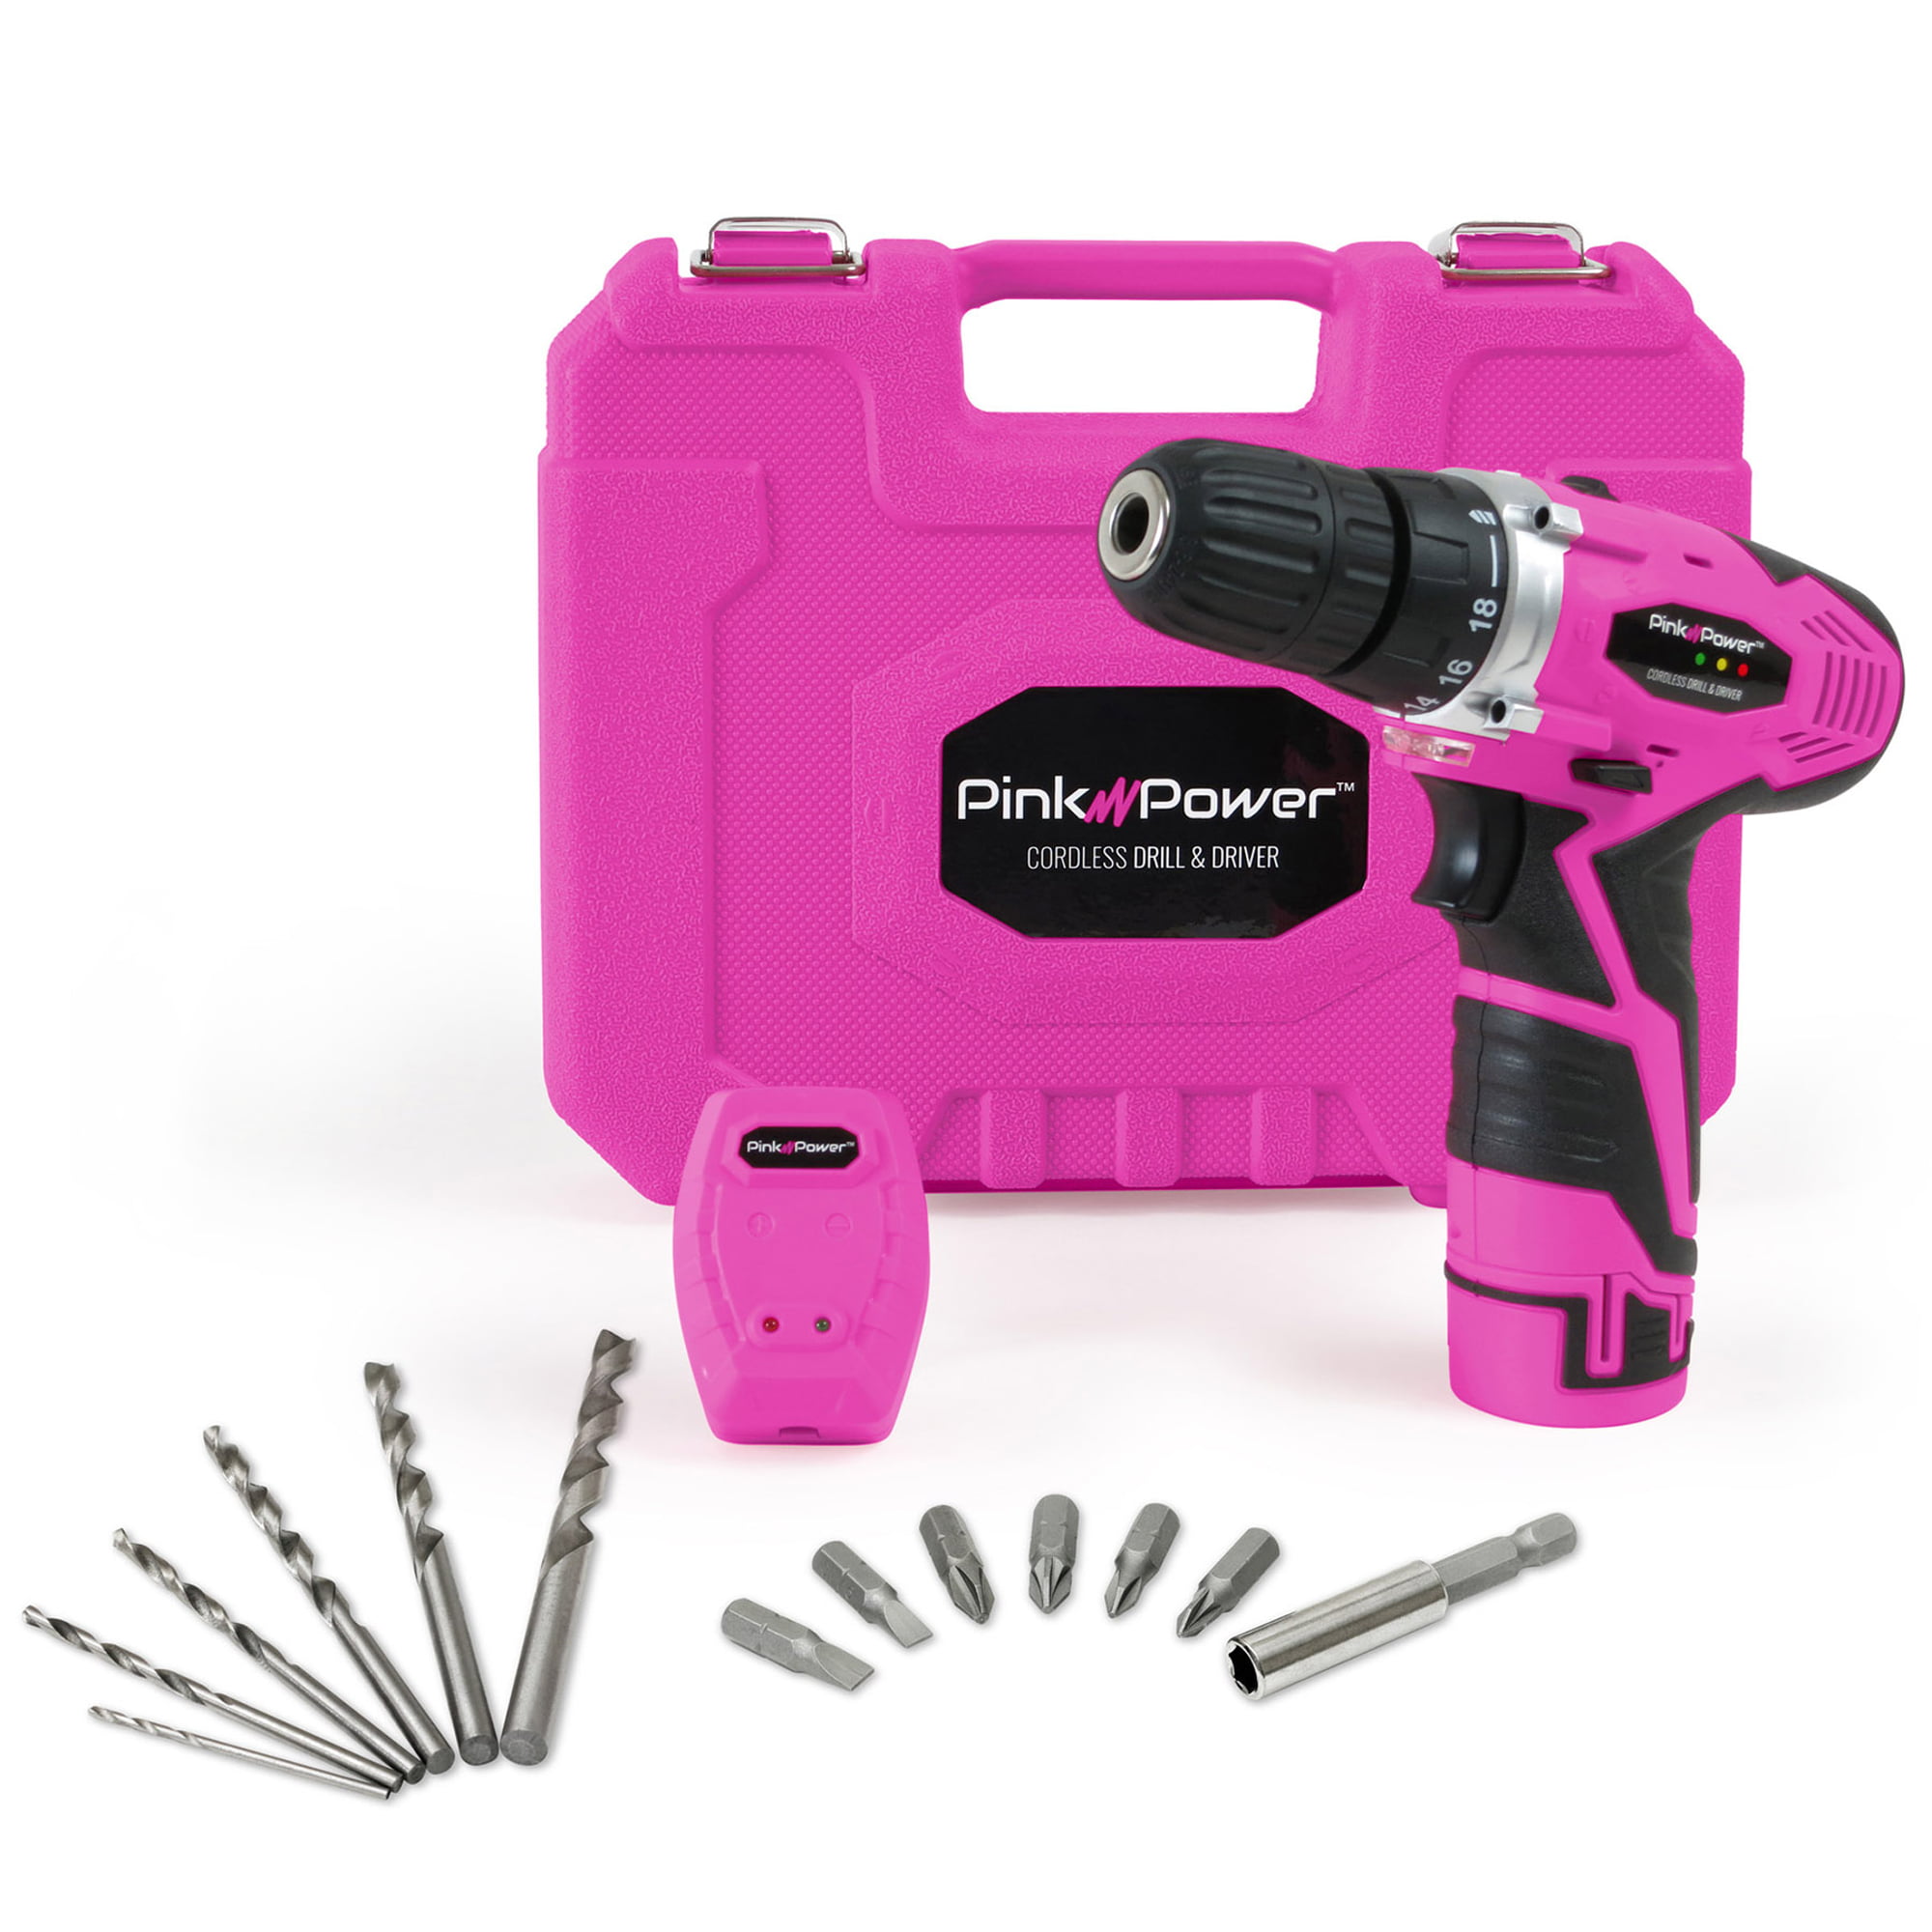 Pink Power Drill PP182 18V Cordless Electric Drill Driver Set for Women Charger and 2 Batteries Tool Case 18 Volt Drill 